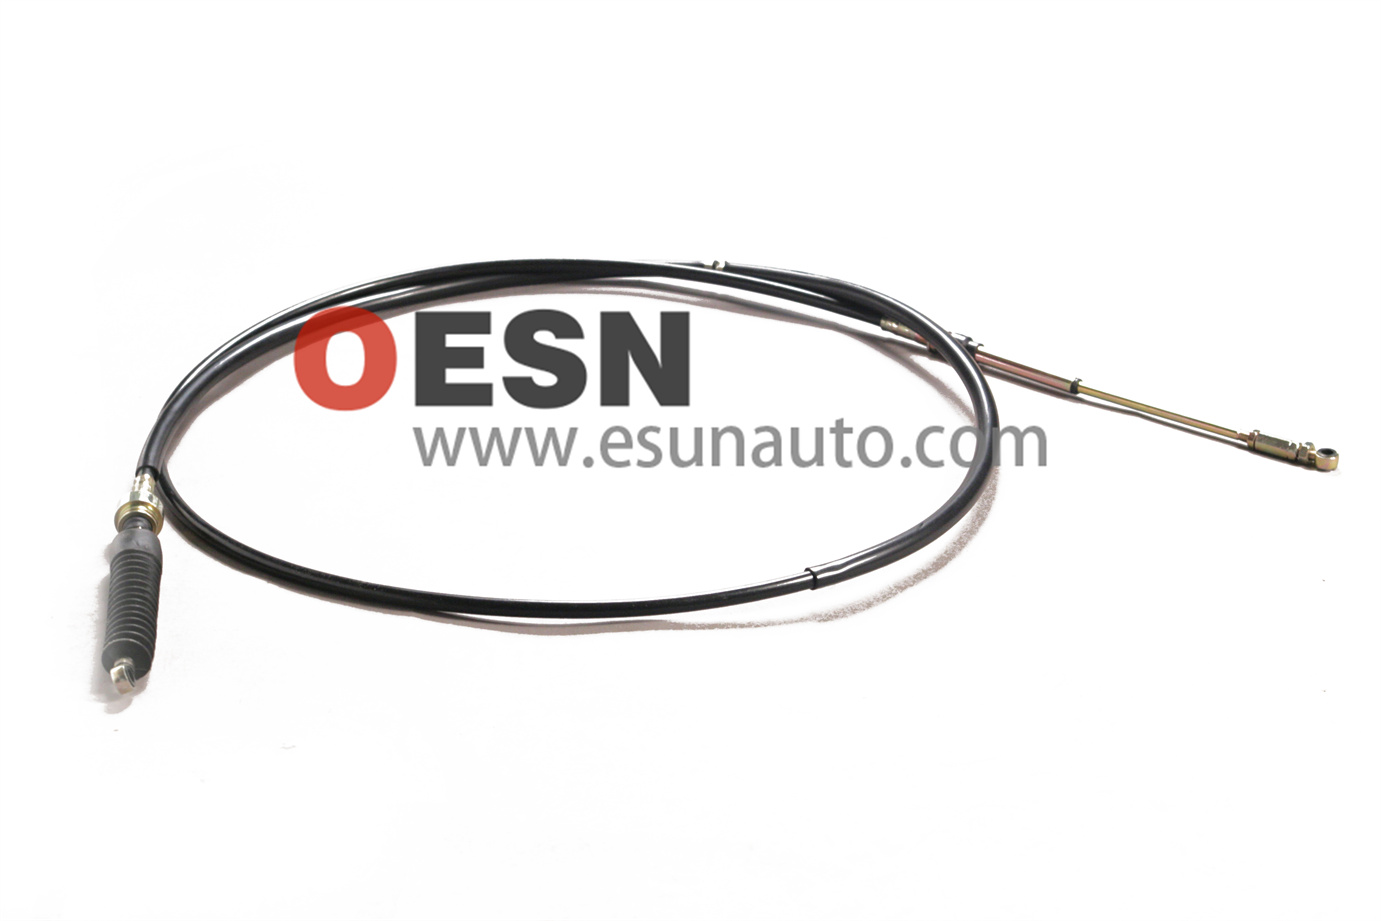 Gear selector cable  ESN70025  OEM8973504360 8973504280